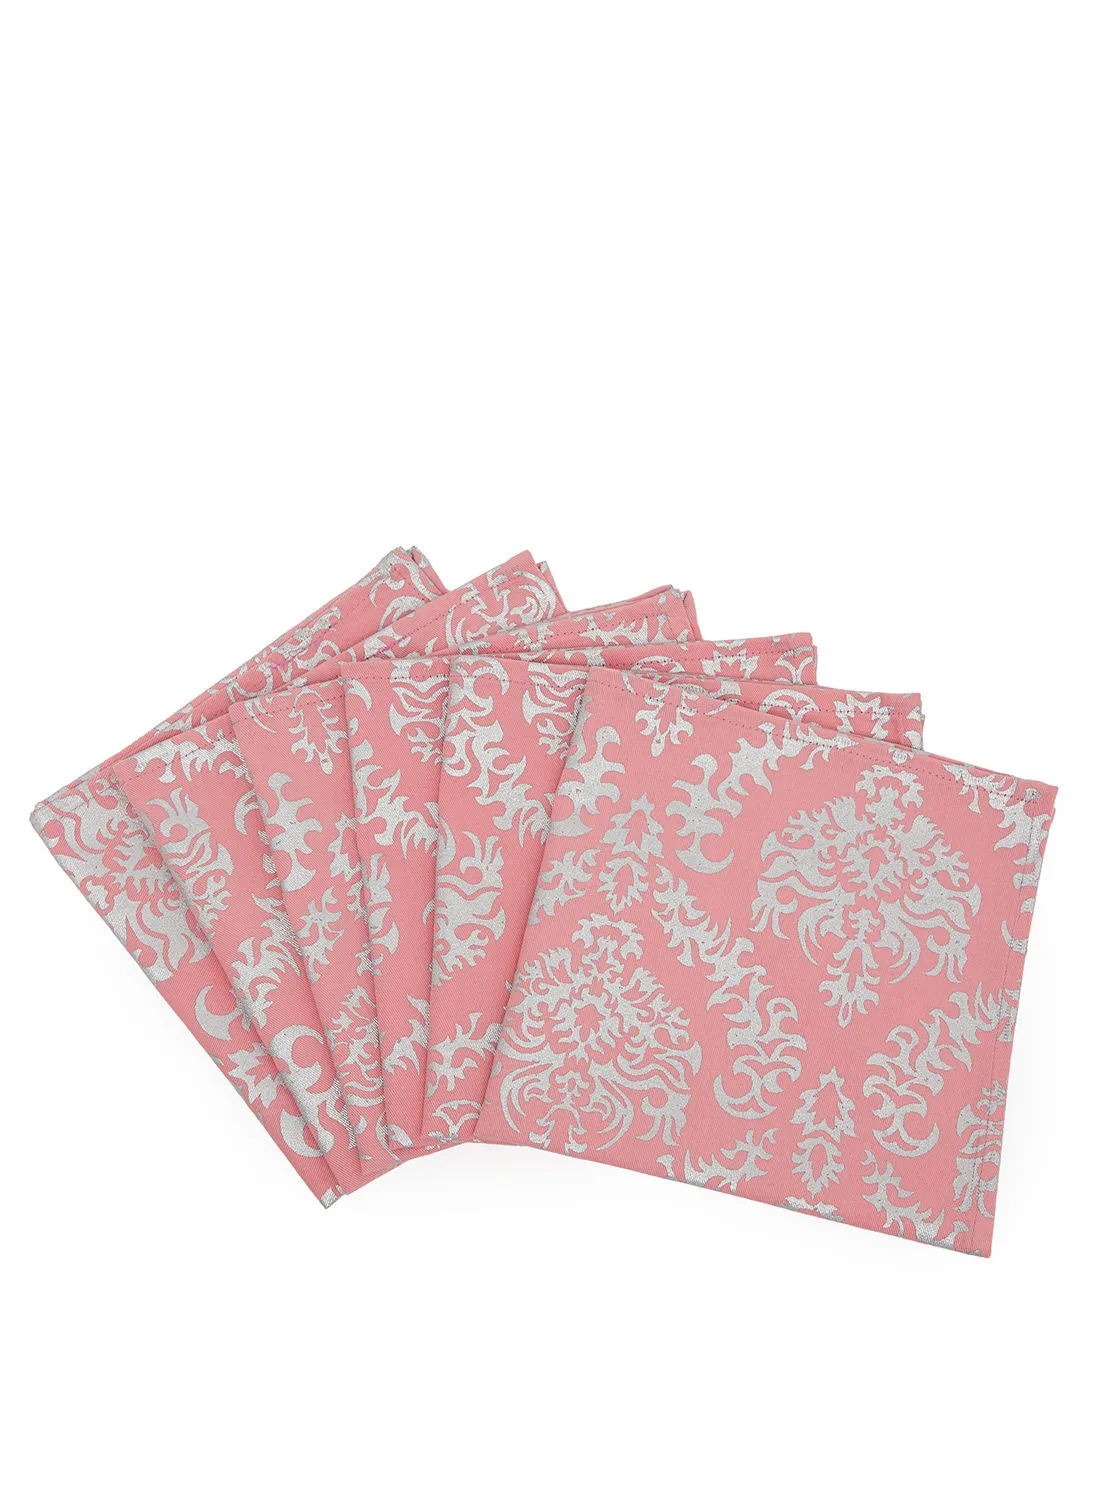 Amal 6 Piece Table Napkin Set - Printed Cloth Napkins For Dining Table - Napkins - Silver/Pink